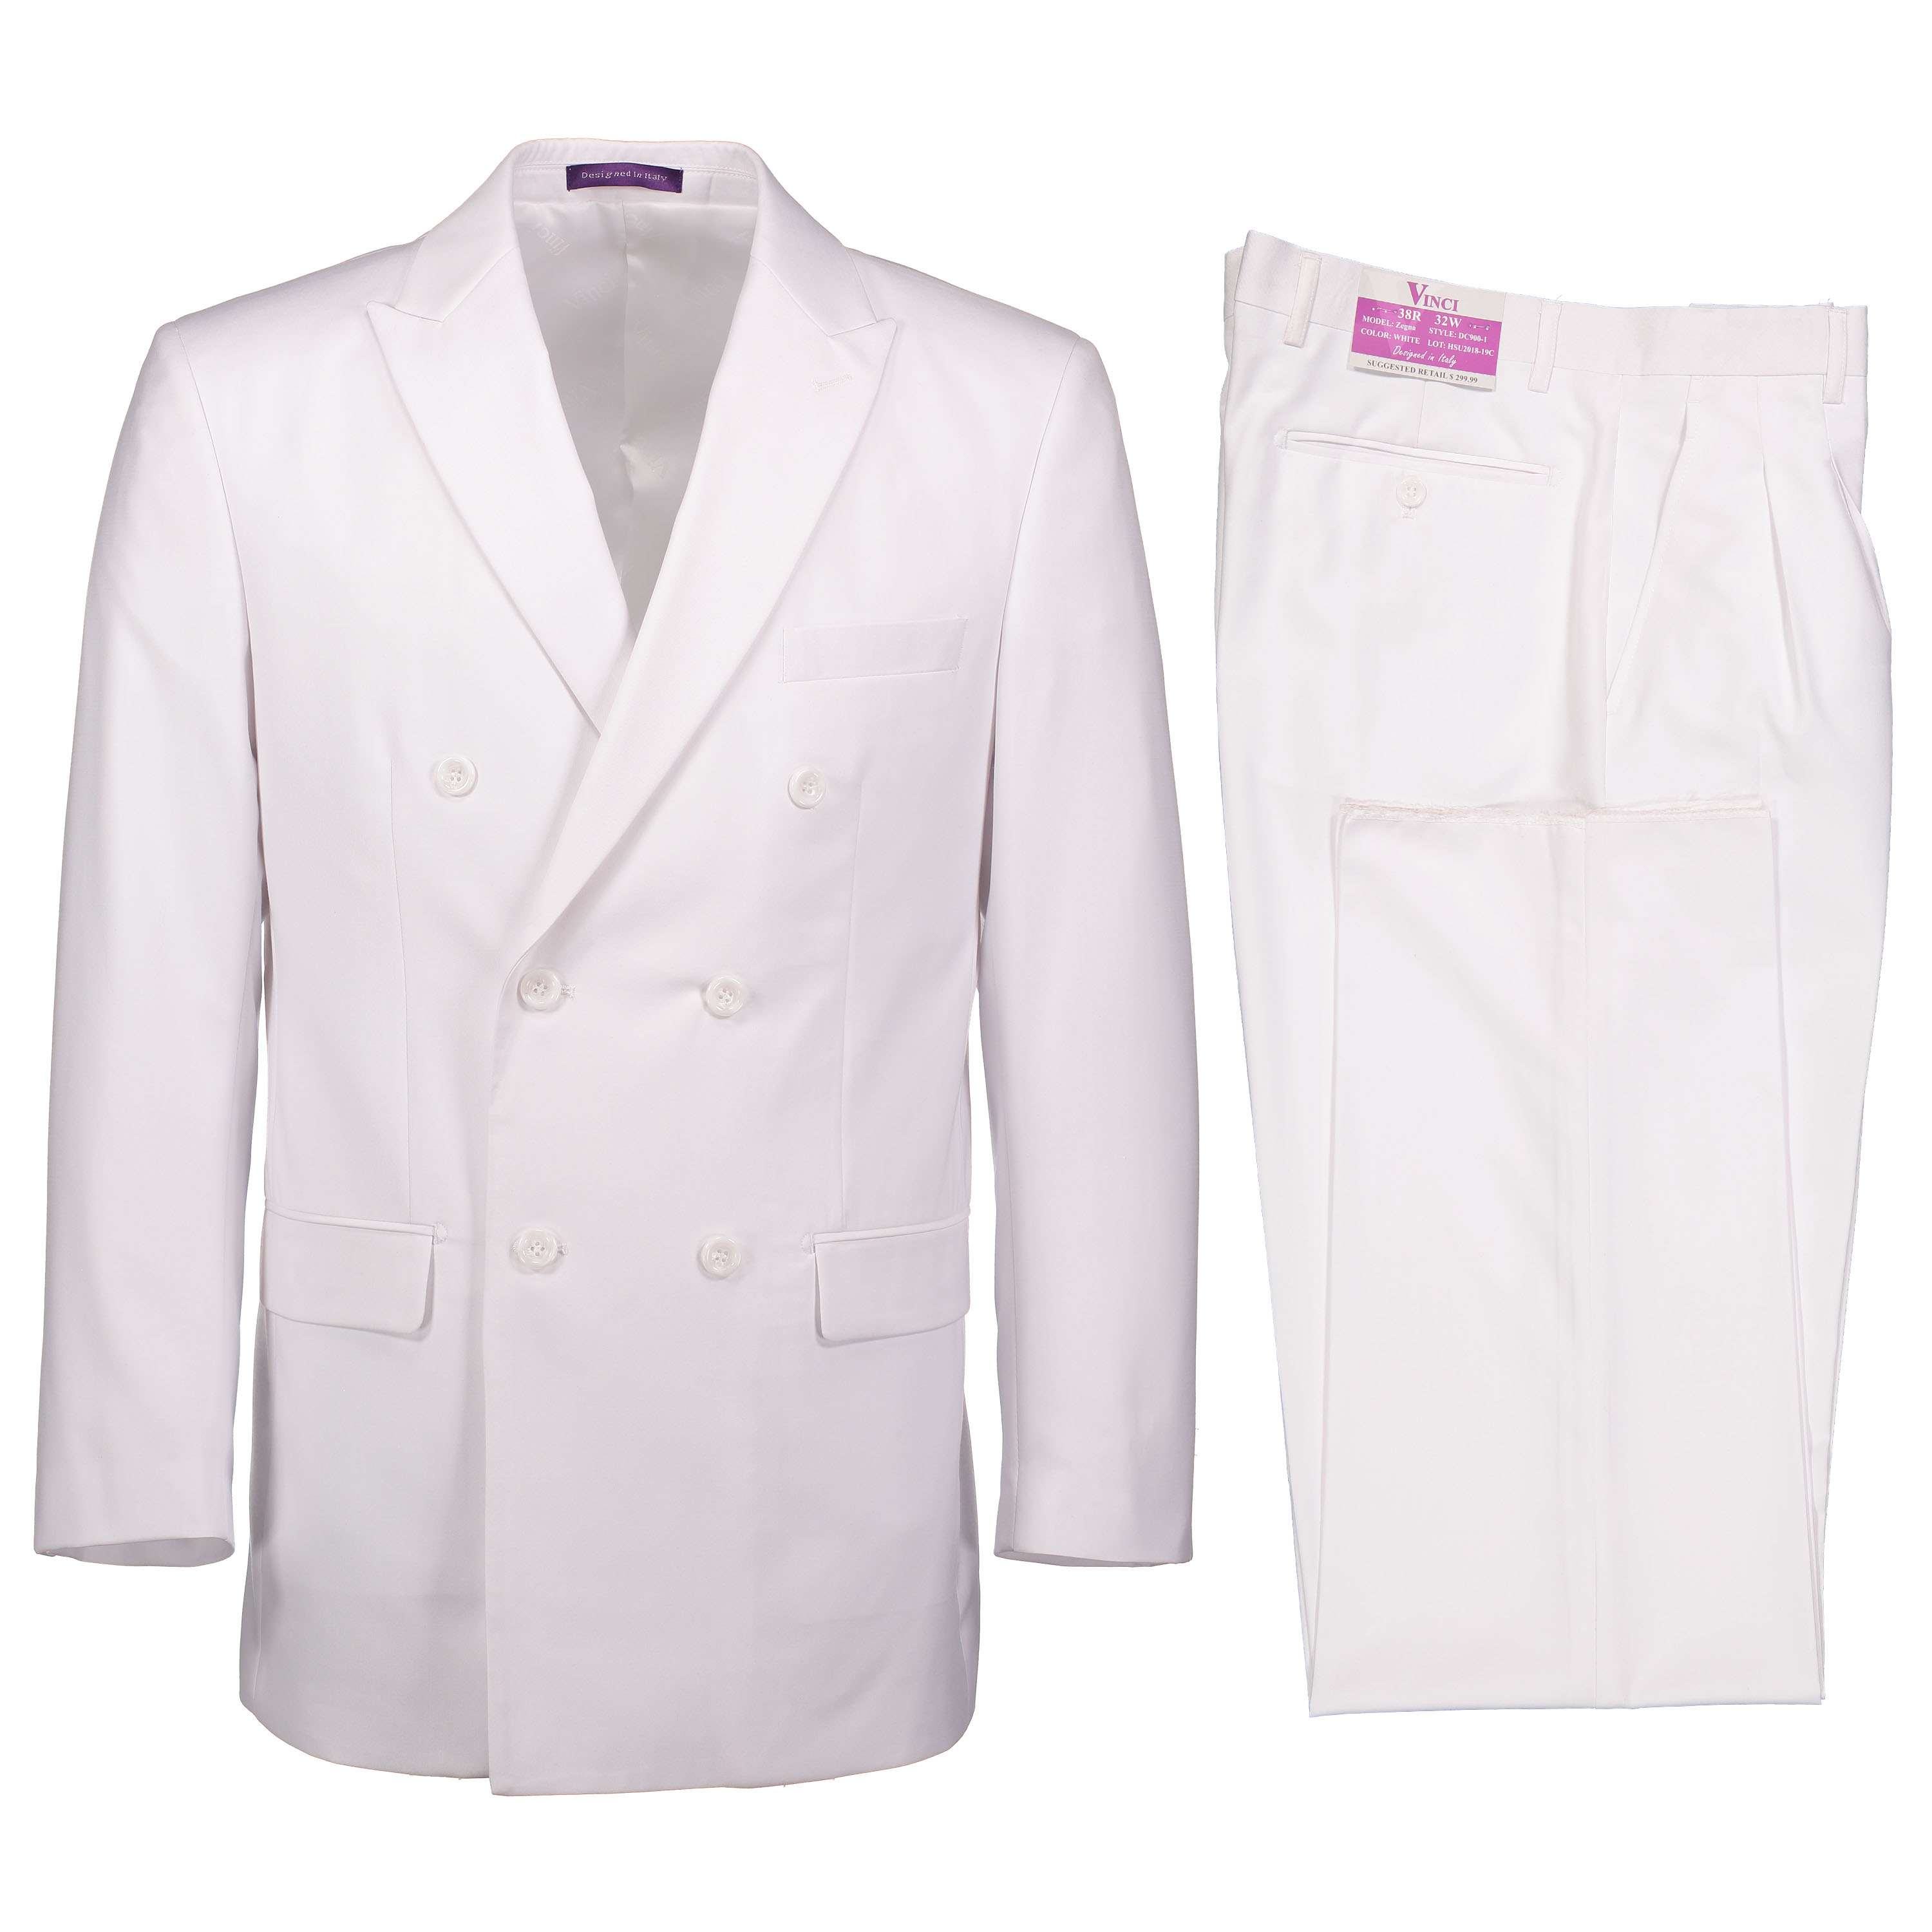 VINCI Men's White Double Breasted 6 Button Classic Fit Suit NEW | eBay